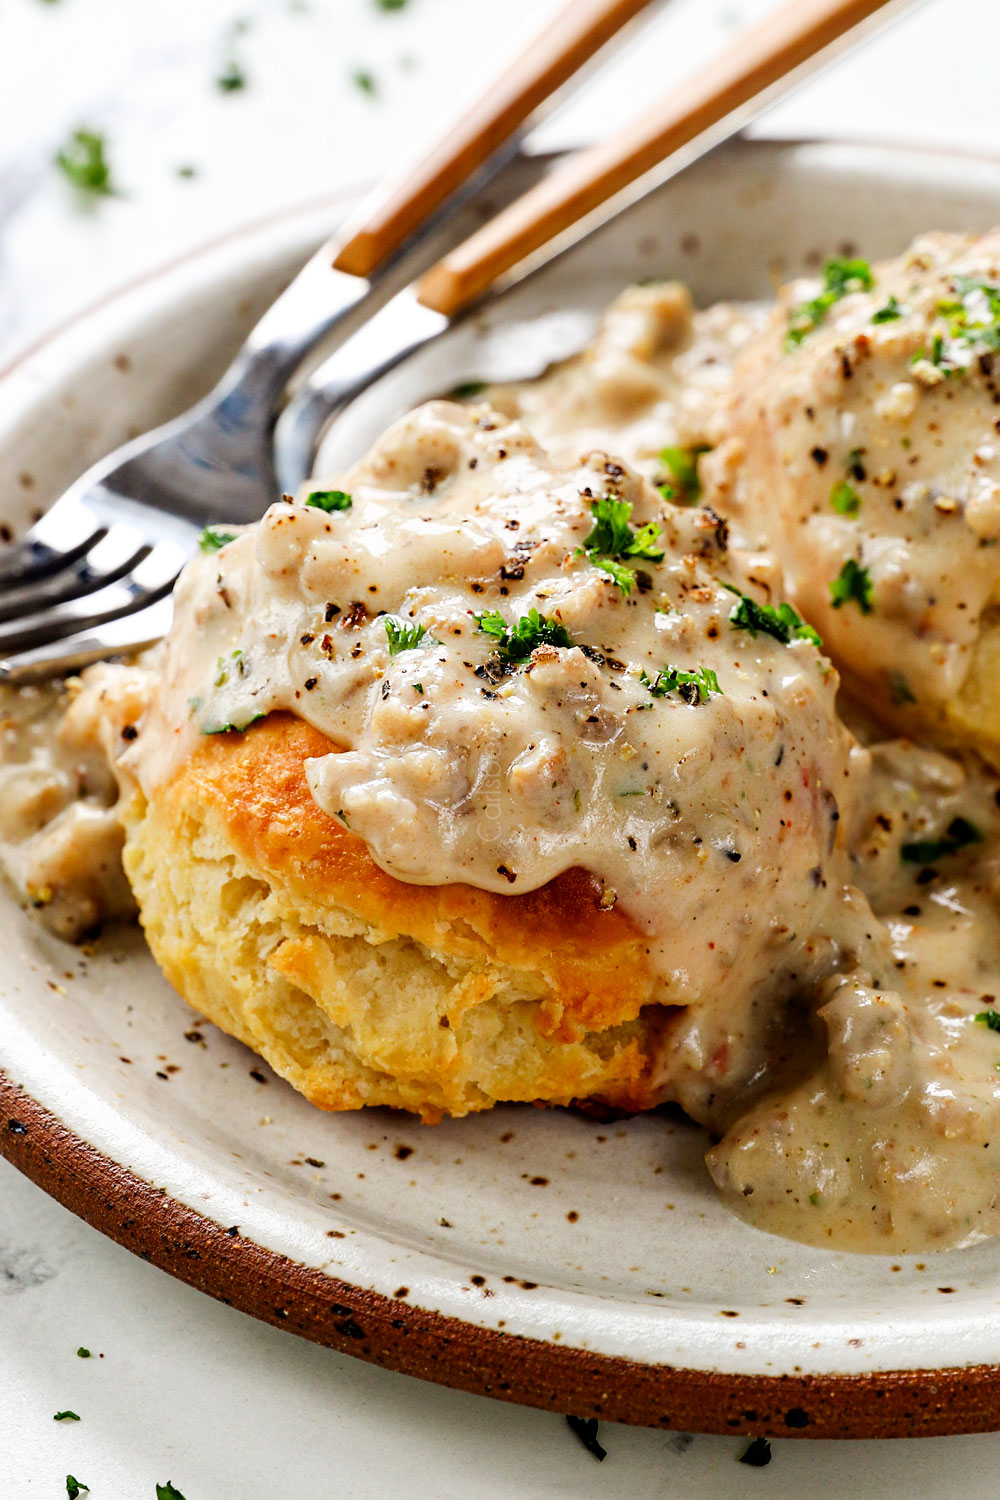 up close of sausage gravy and biscuits showing how fluffy and tall the biscuits are